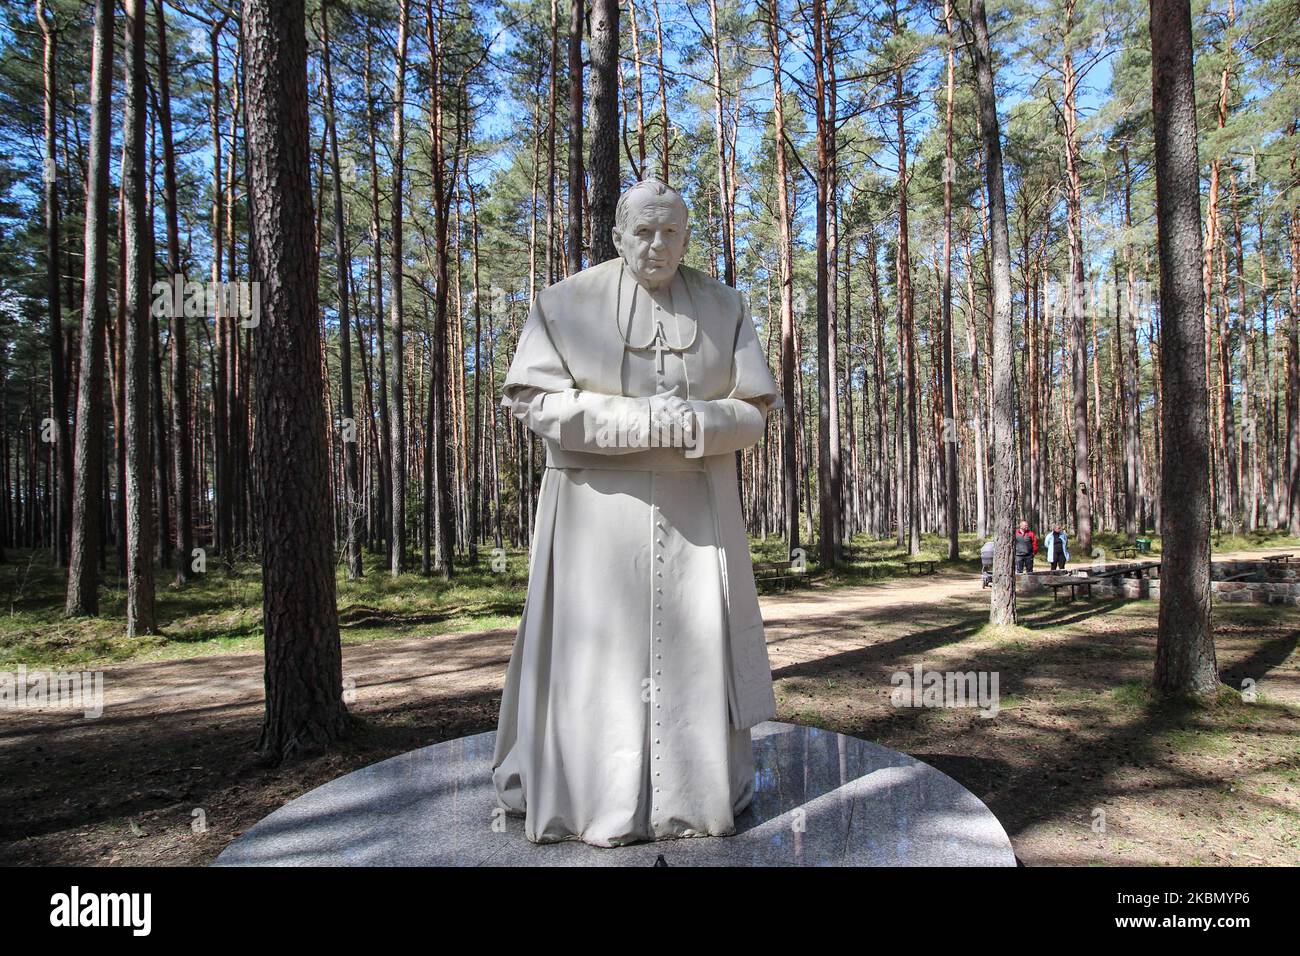 Pope John Paul II (Jan Pawel II, Karol Wojtyla) statue at the Massacres in Piasnica memorial place is seen in Piasnica, northern Poland, on 26 April 2020 The massacres in Piasnica were mass executions carried out by Germans, during World War II, between the fall of 1939 and spring of 1940. The exact number of people murdered estimates range between 12,000 and 14,000 victims. Most of them were Polish intellectuals from Pomerania, but Poles, Jews, Czechs and German inmates from mental hospitals were also murdered. (Photo by Michal Fludra/NurPhoto) Stock Photo